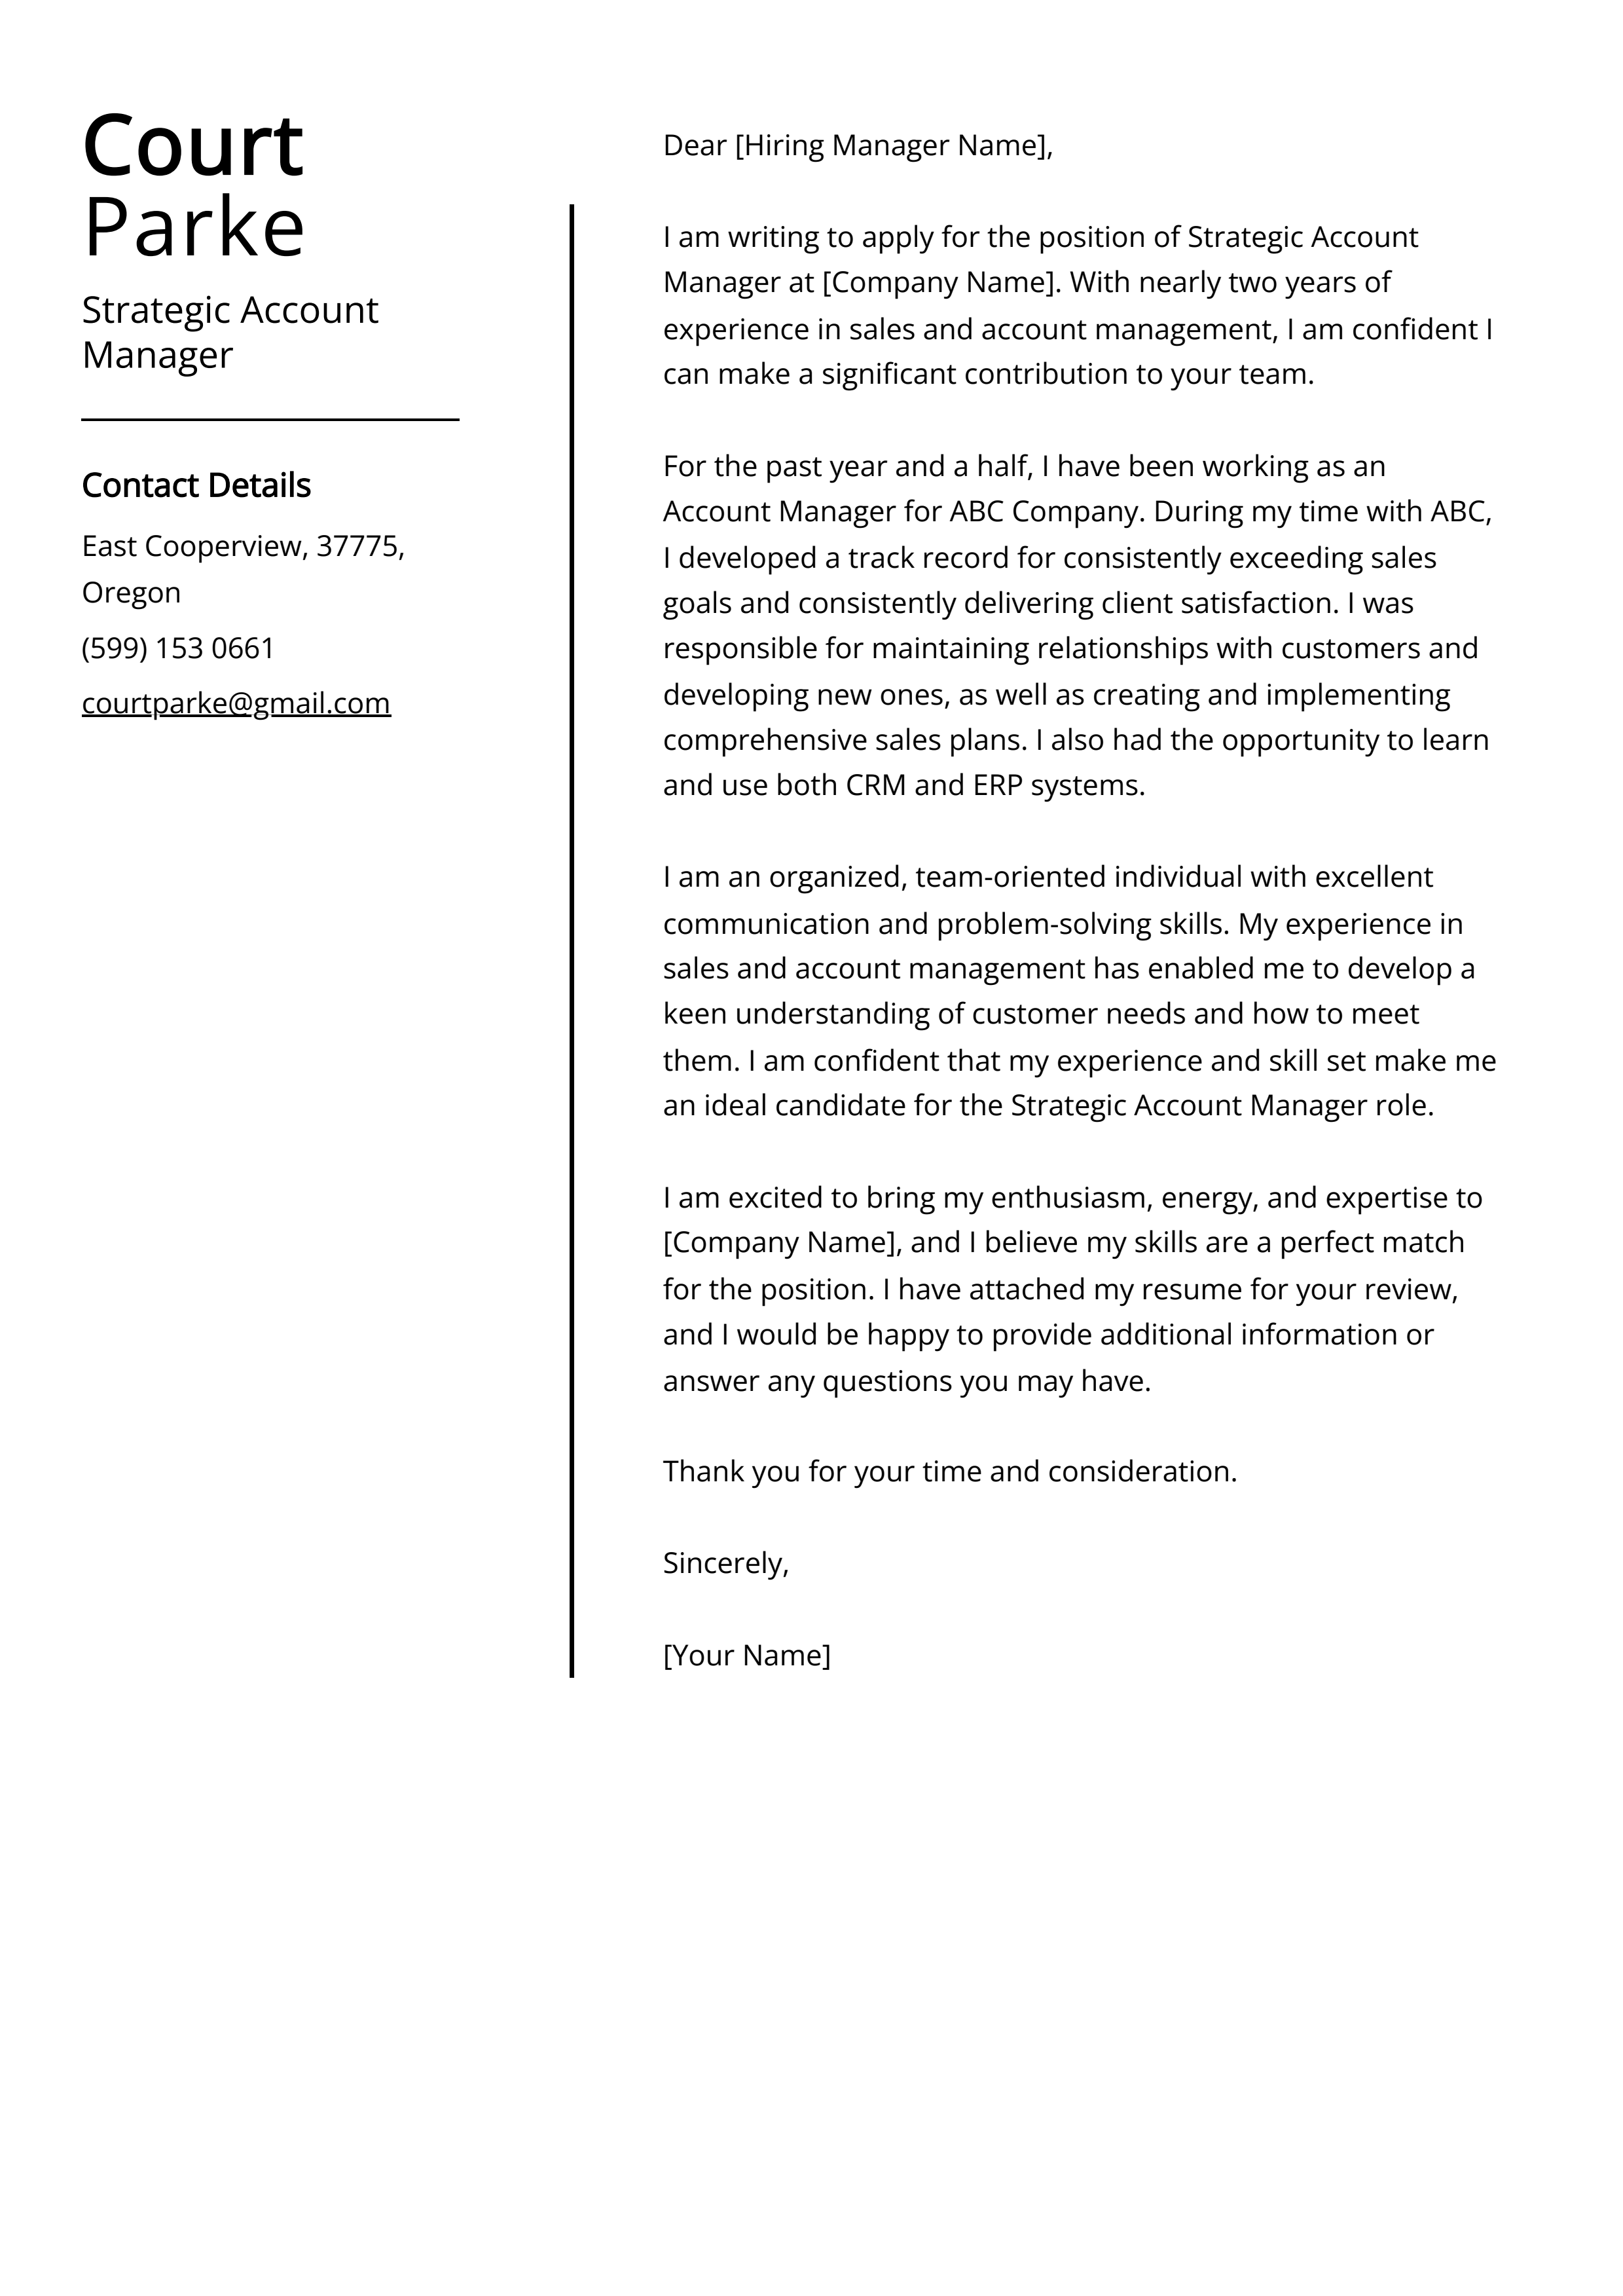 Strategic Account Manager Cover Letter Example